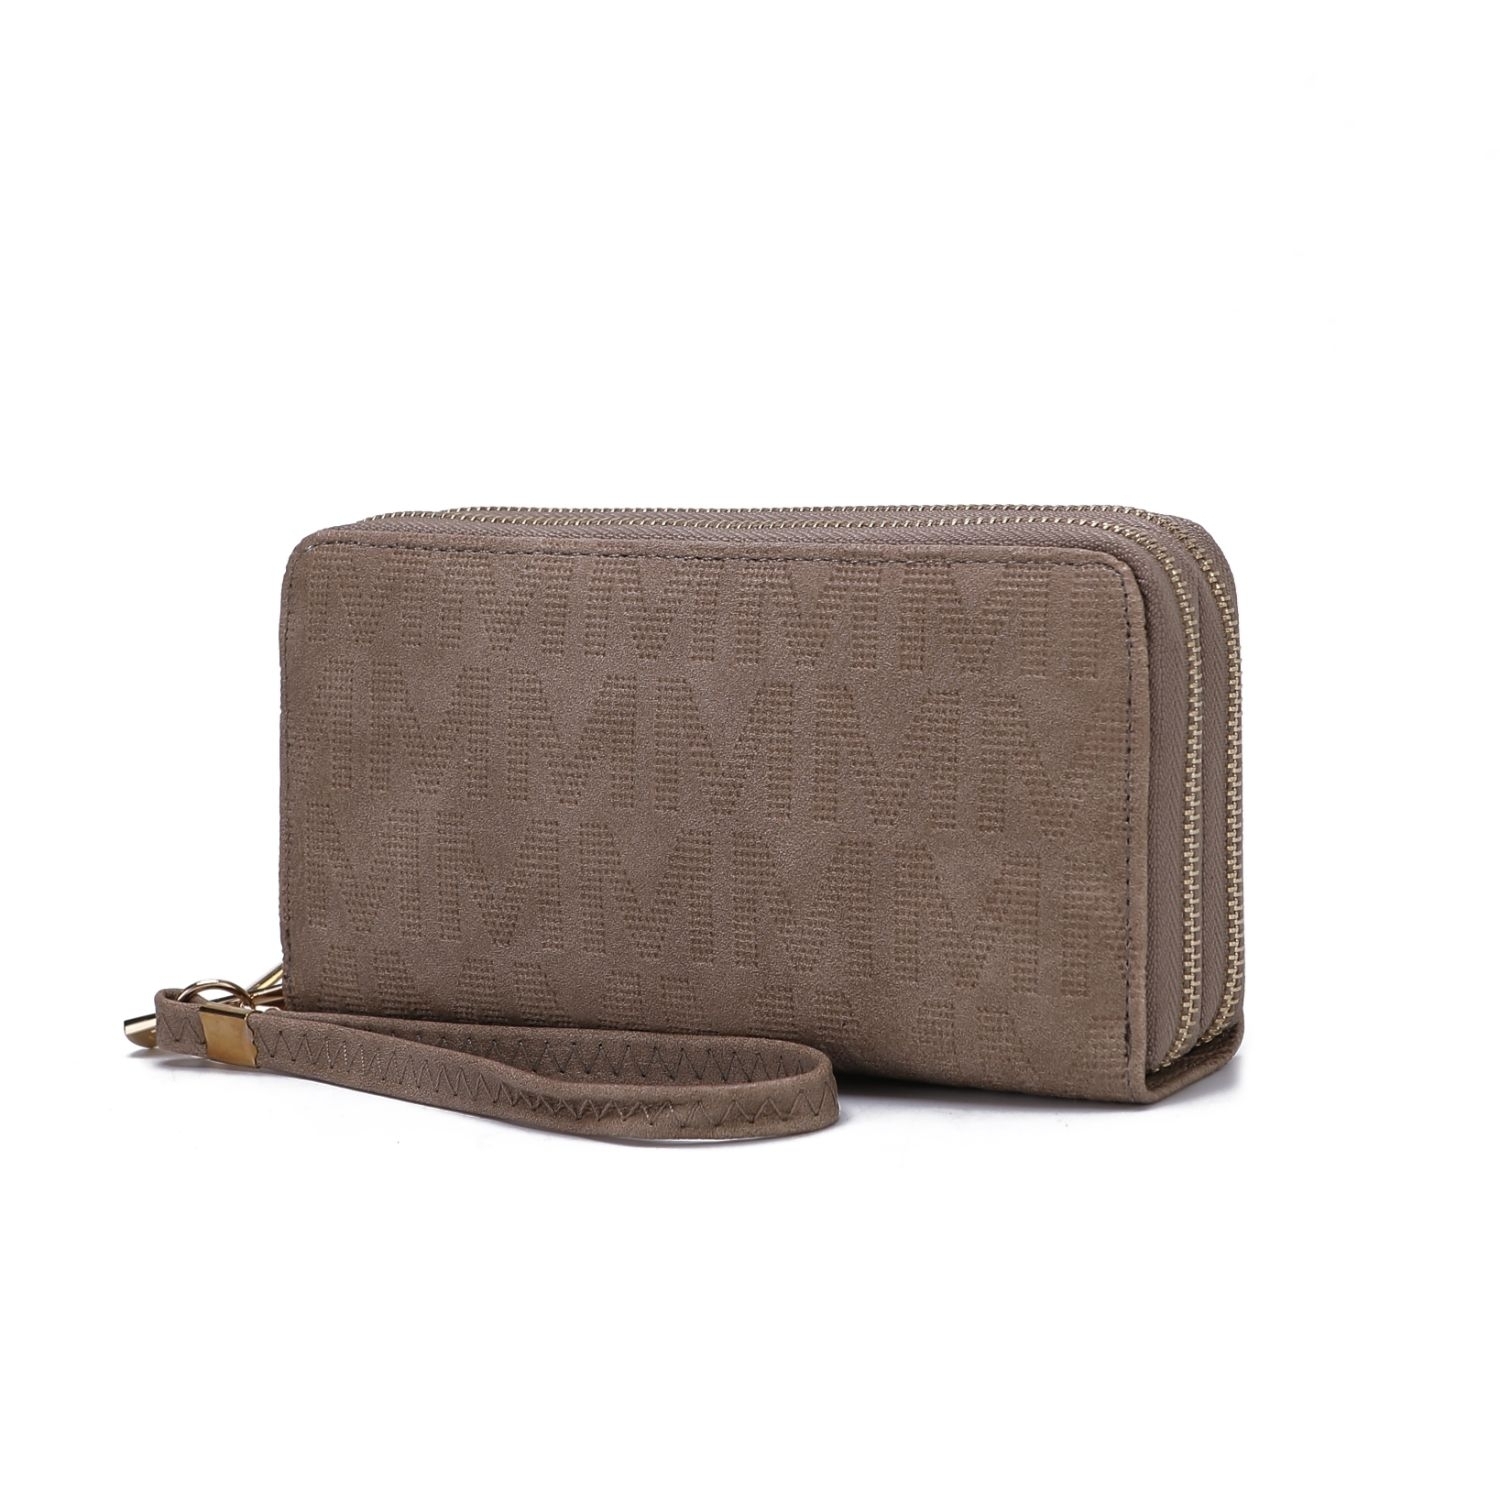 MKF Collection Lisbette Embossed M Signature Wallet By Mia K. Handbag - Taupe